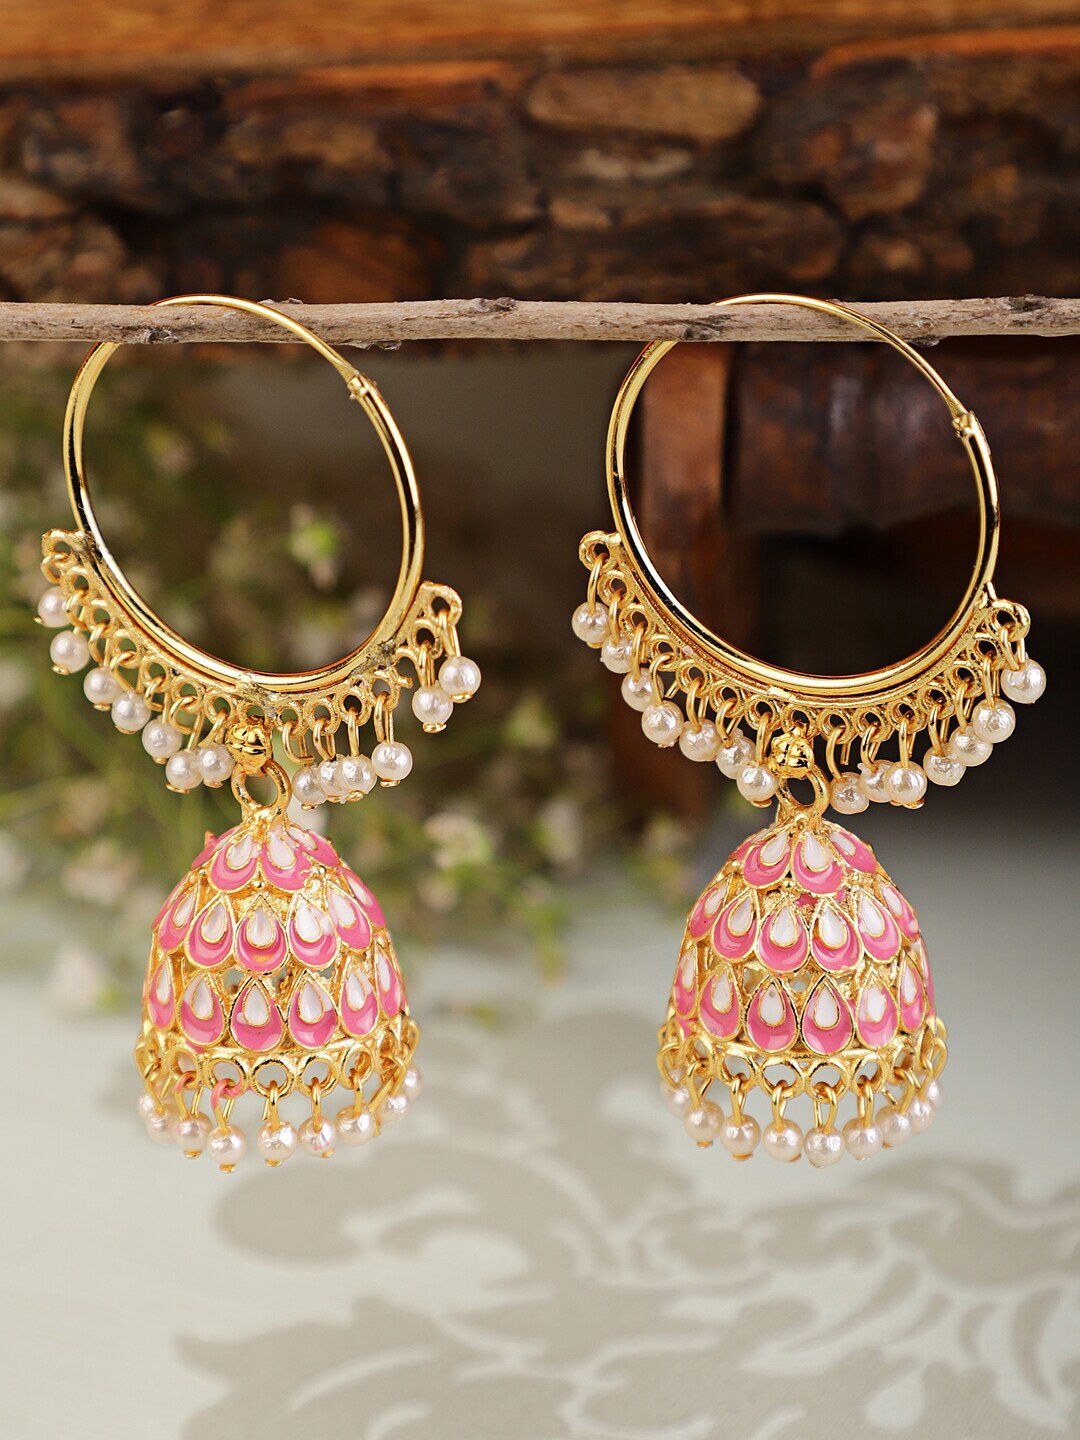 Shining Diva Gold-Toned & Pink Contemporary Jhumkas Earrings Price in India